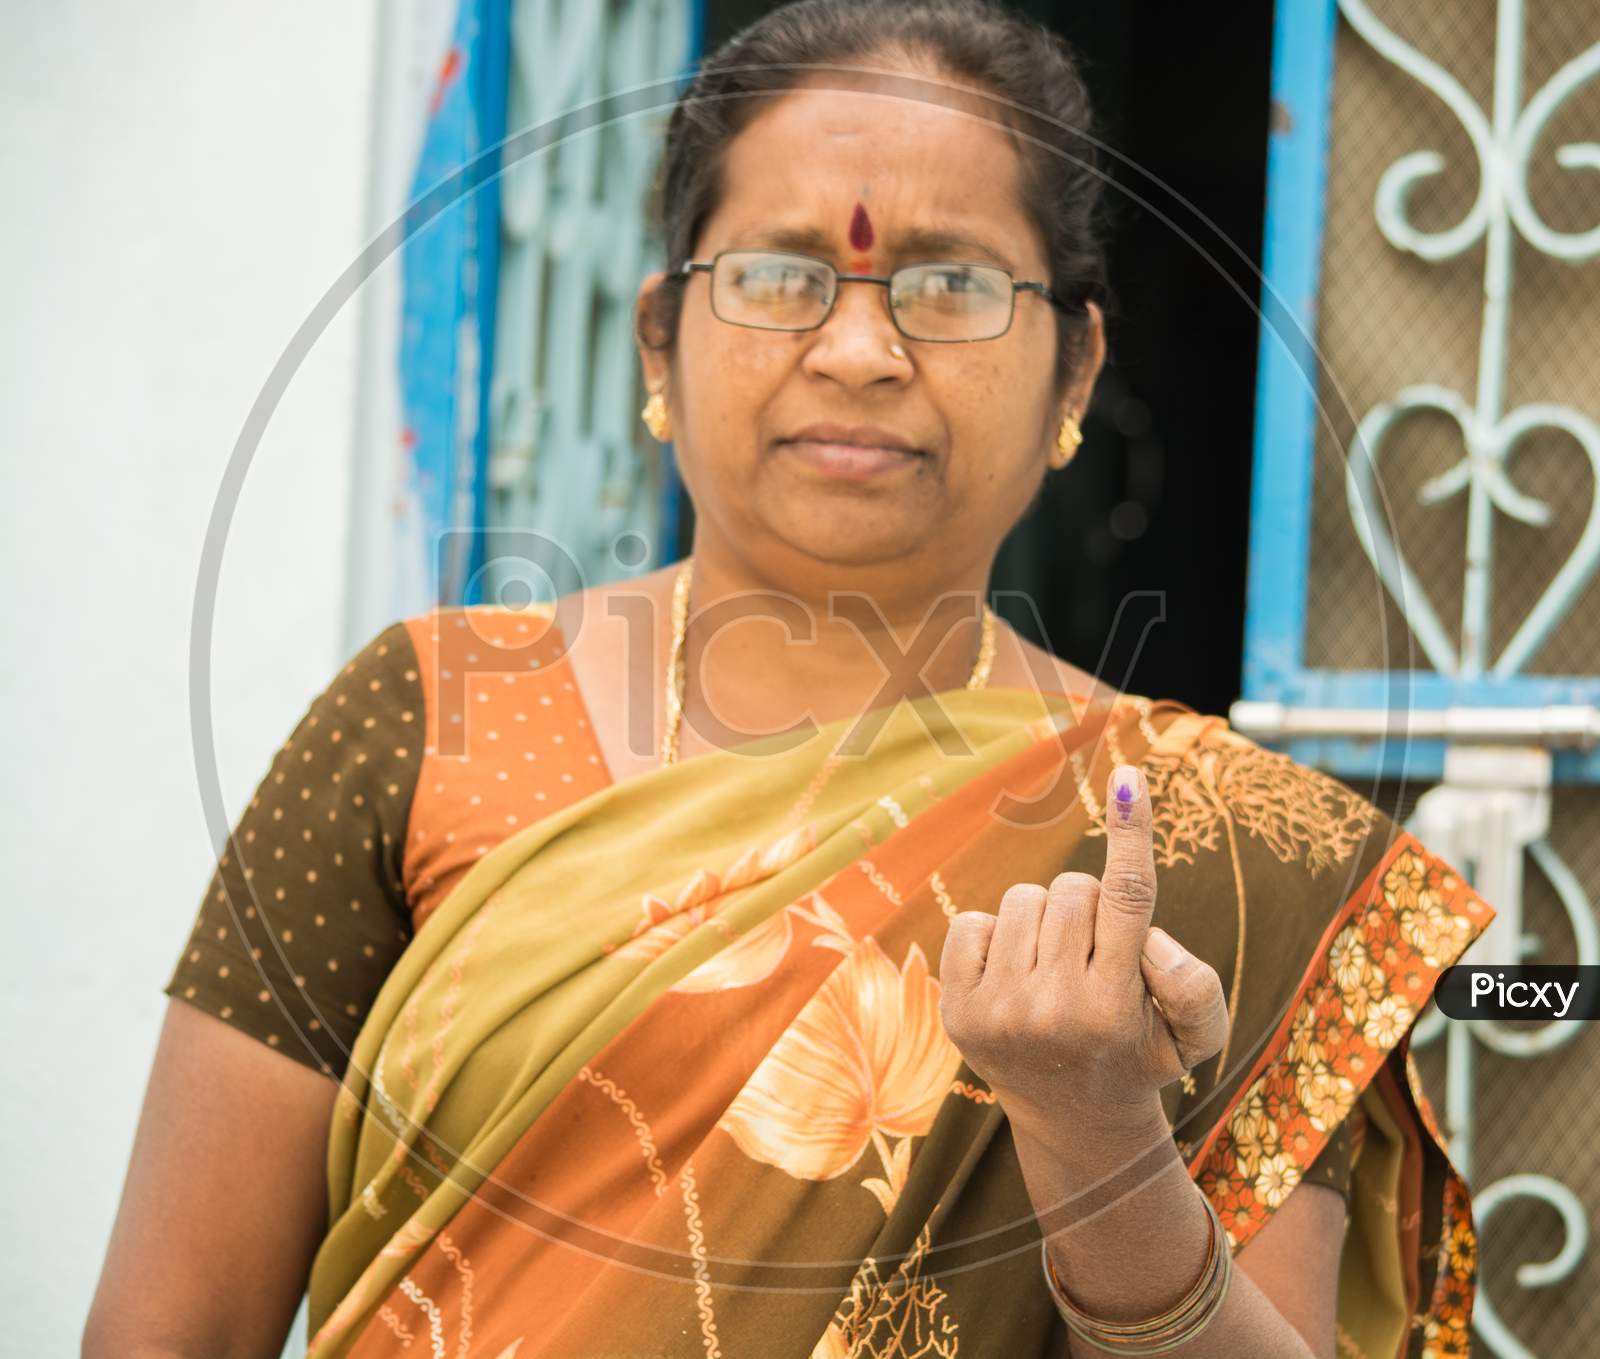 Indian Women Showing Her Voted Finger